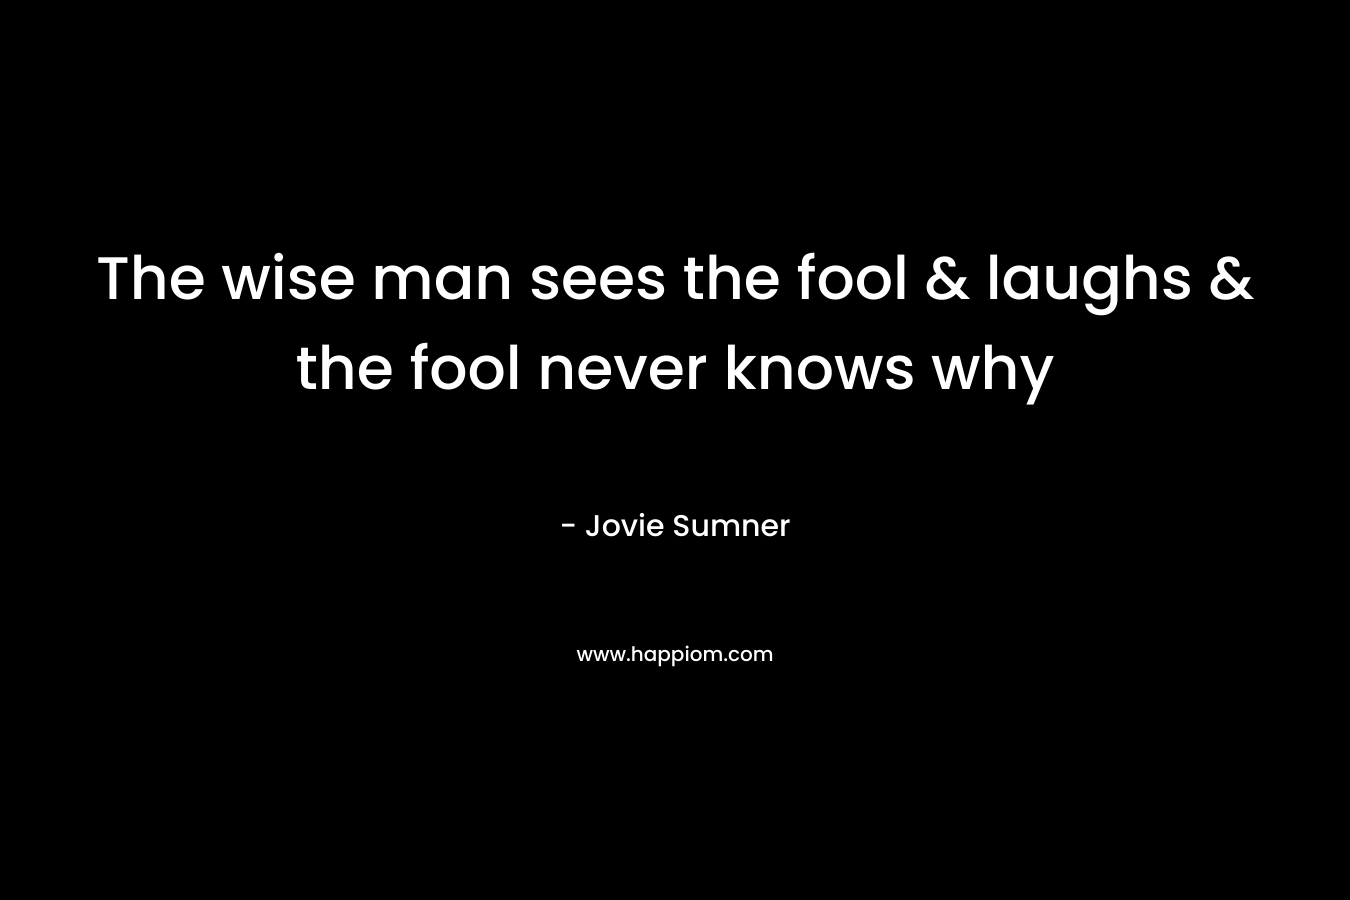 The wise man sees the fool & laughs & the fool never knows why – Jovie Sumner